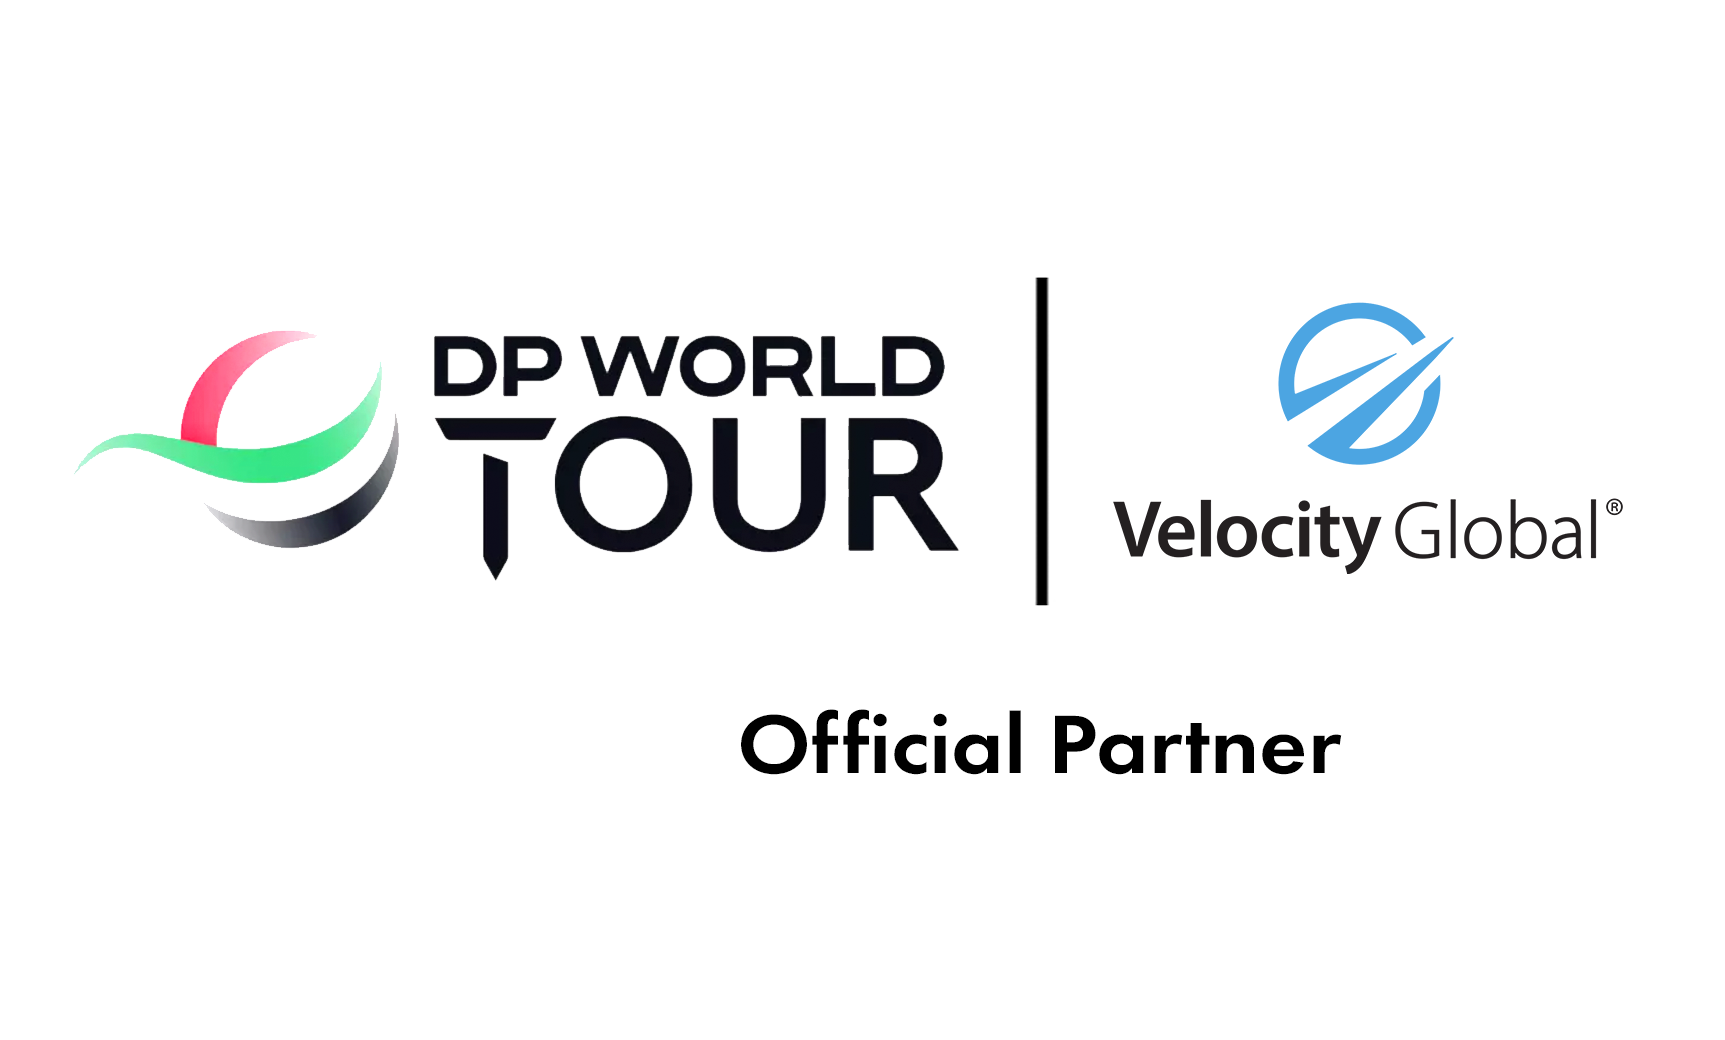 Velocity Global Official Partner of the DP World Tour